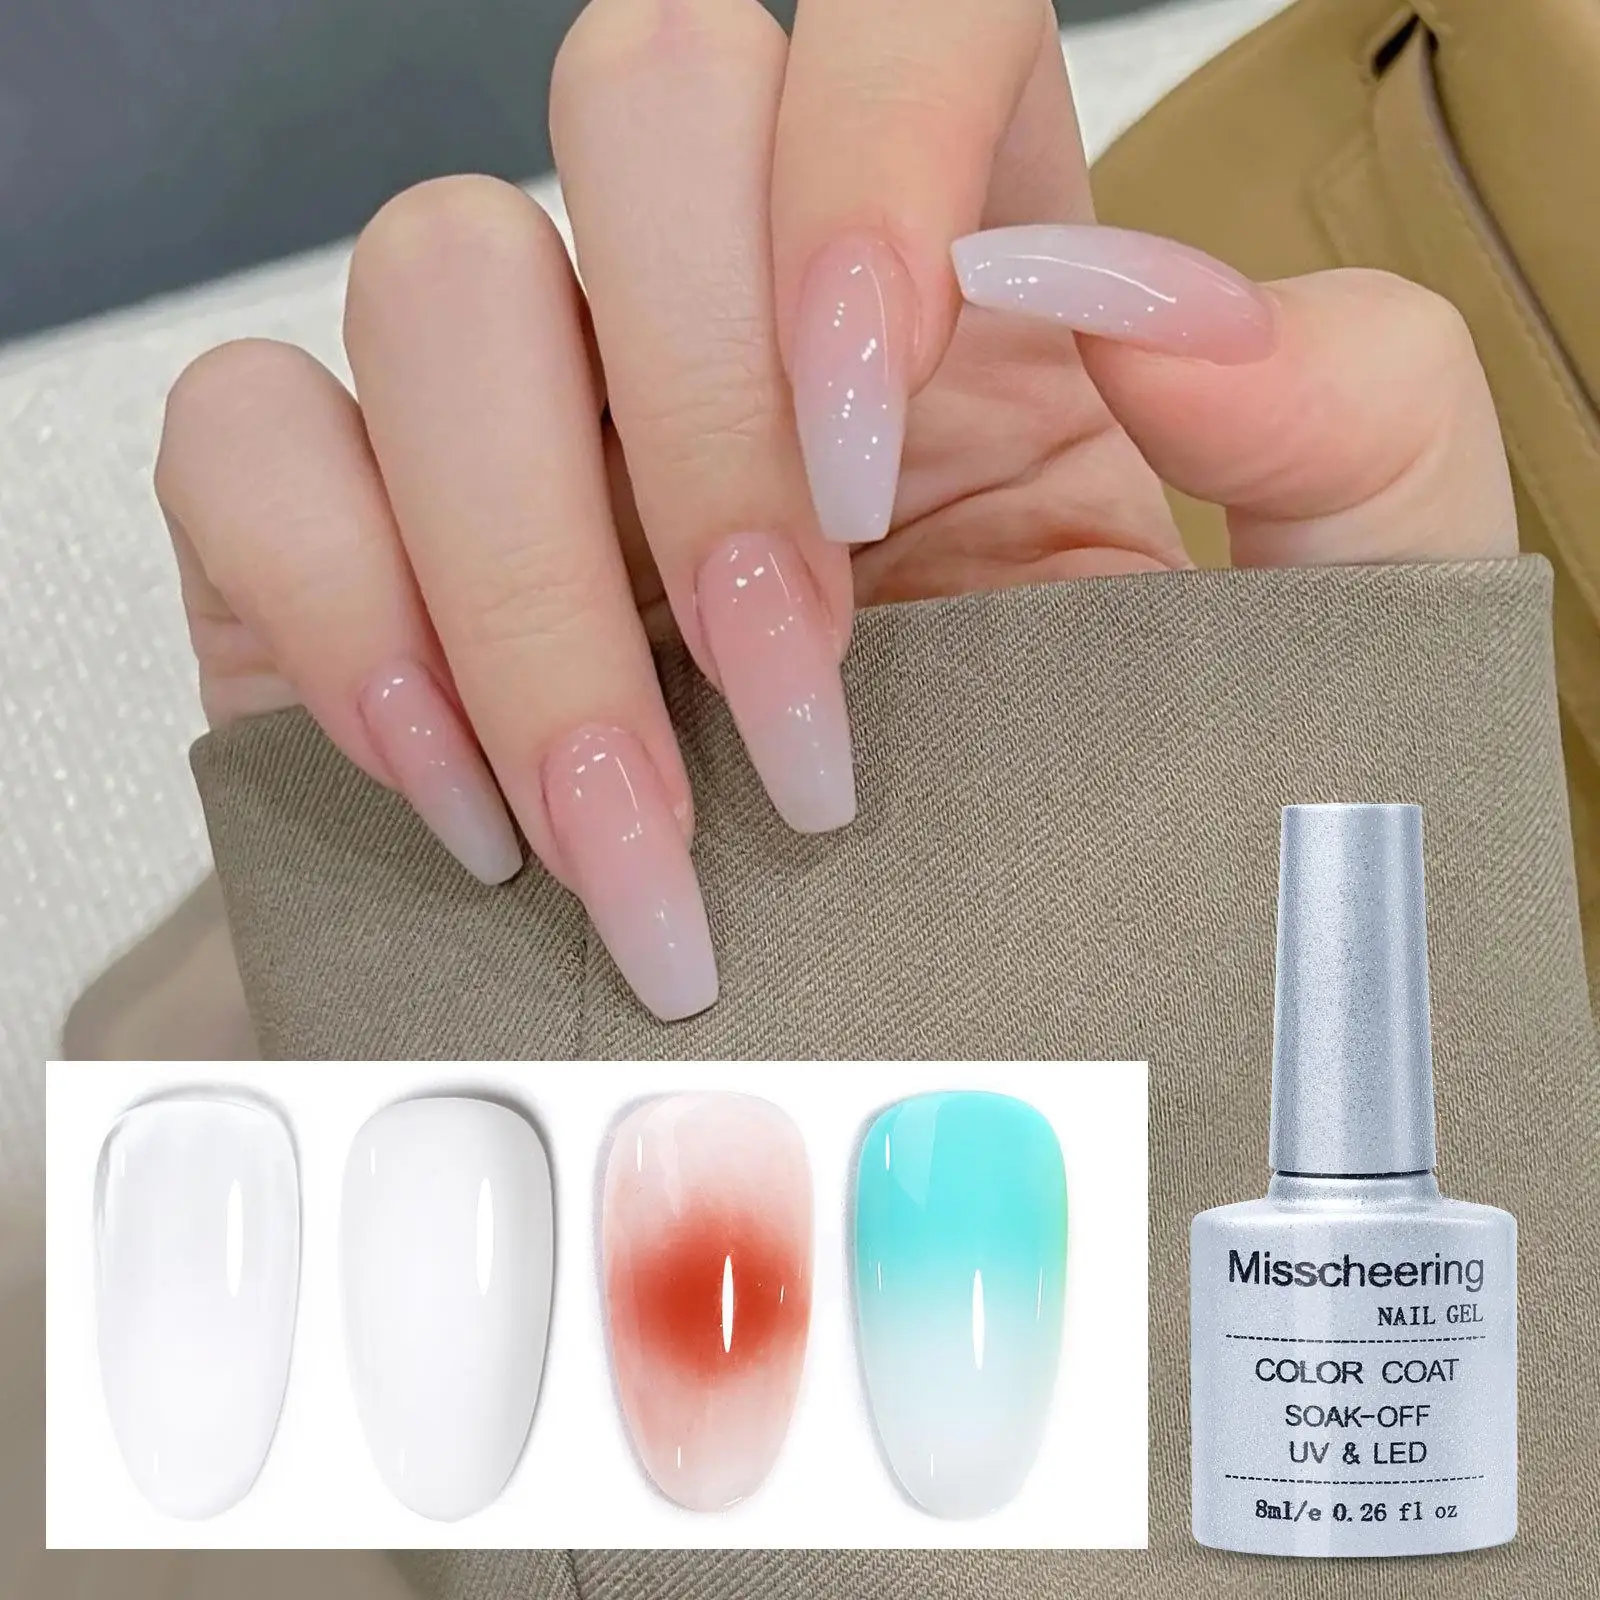 8ml  Manicure Popular Nude Milky Women Girls Spring  Nail Personal Use Milk Translucent Soak Off Cured 